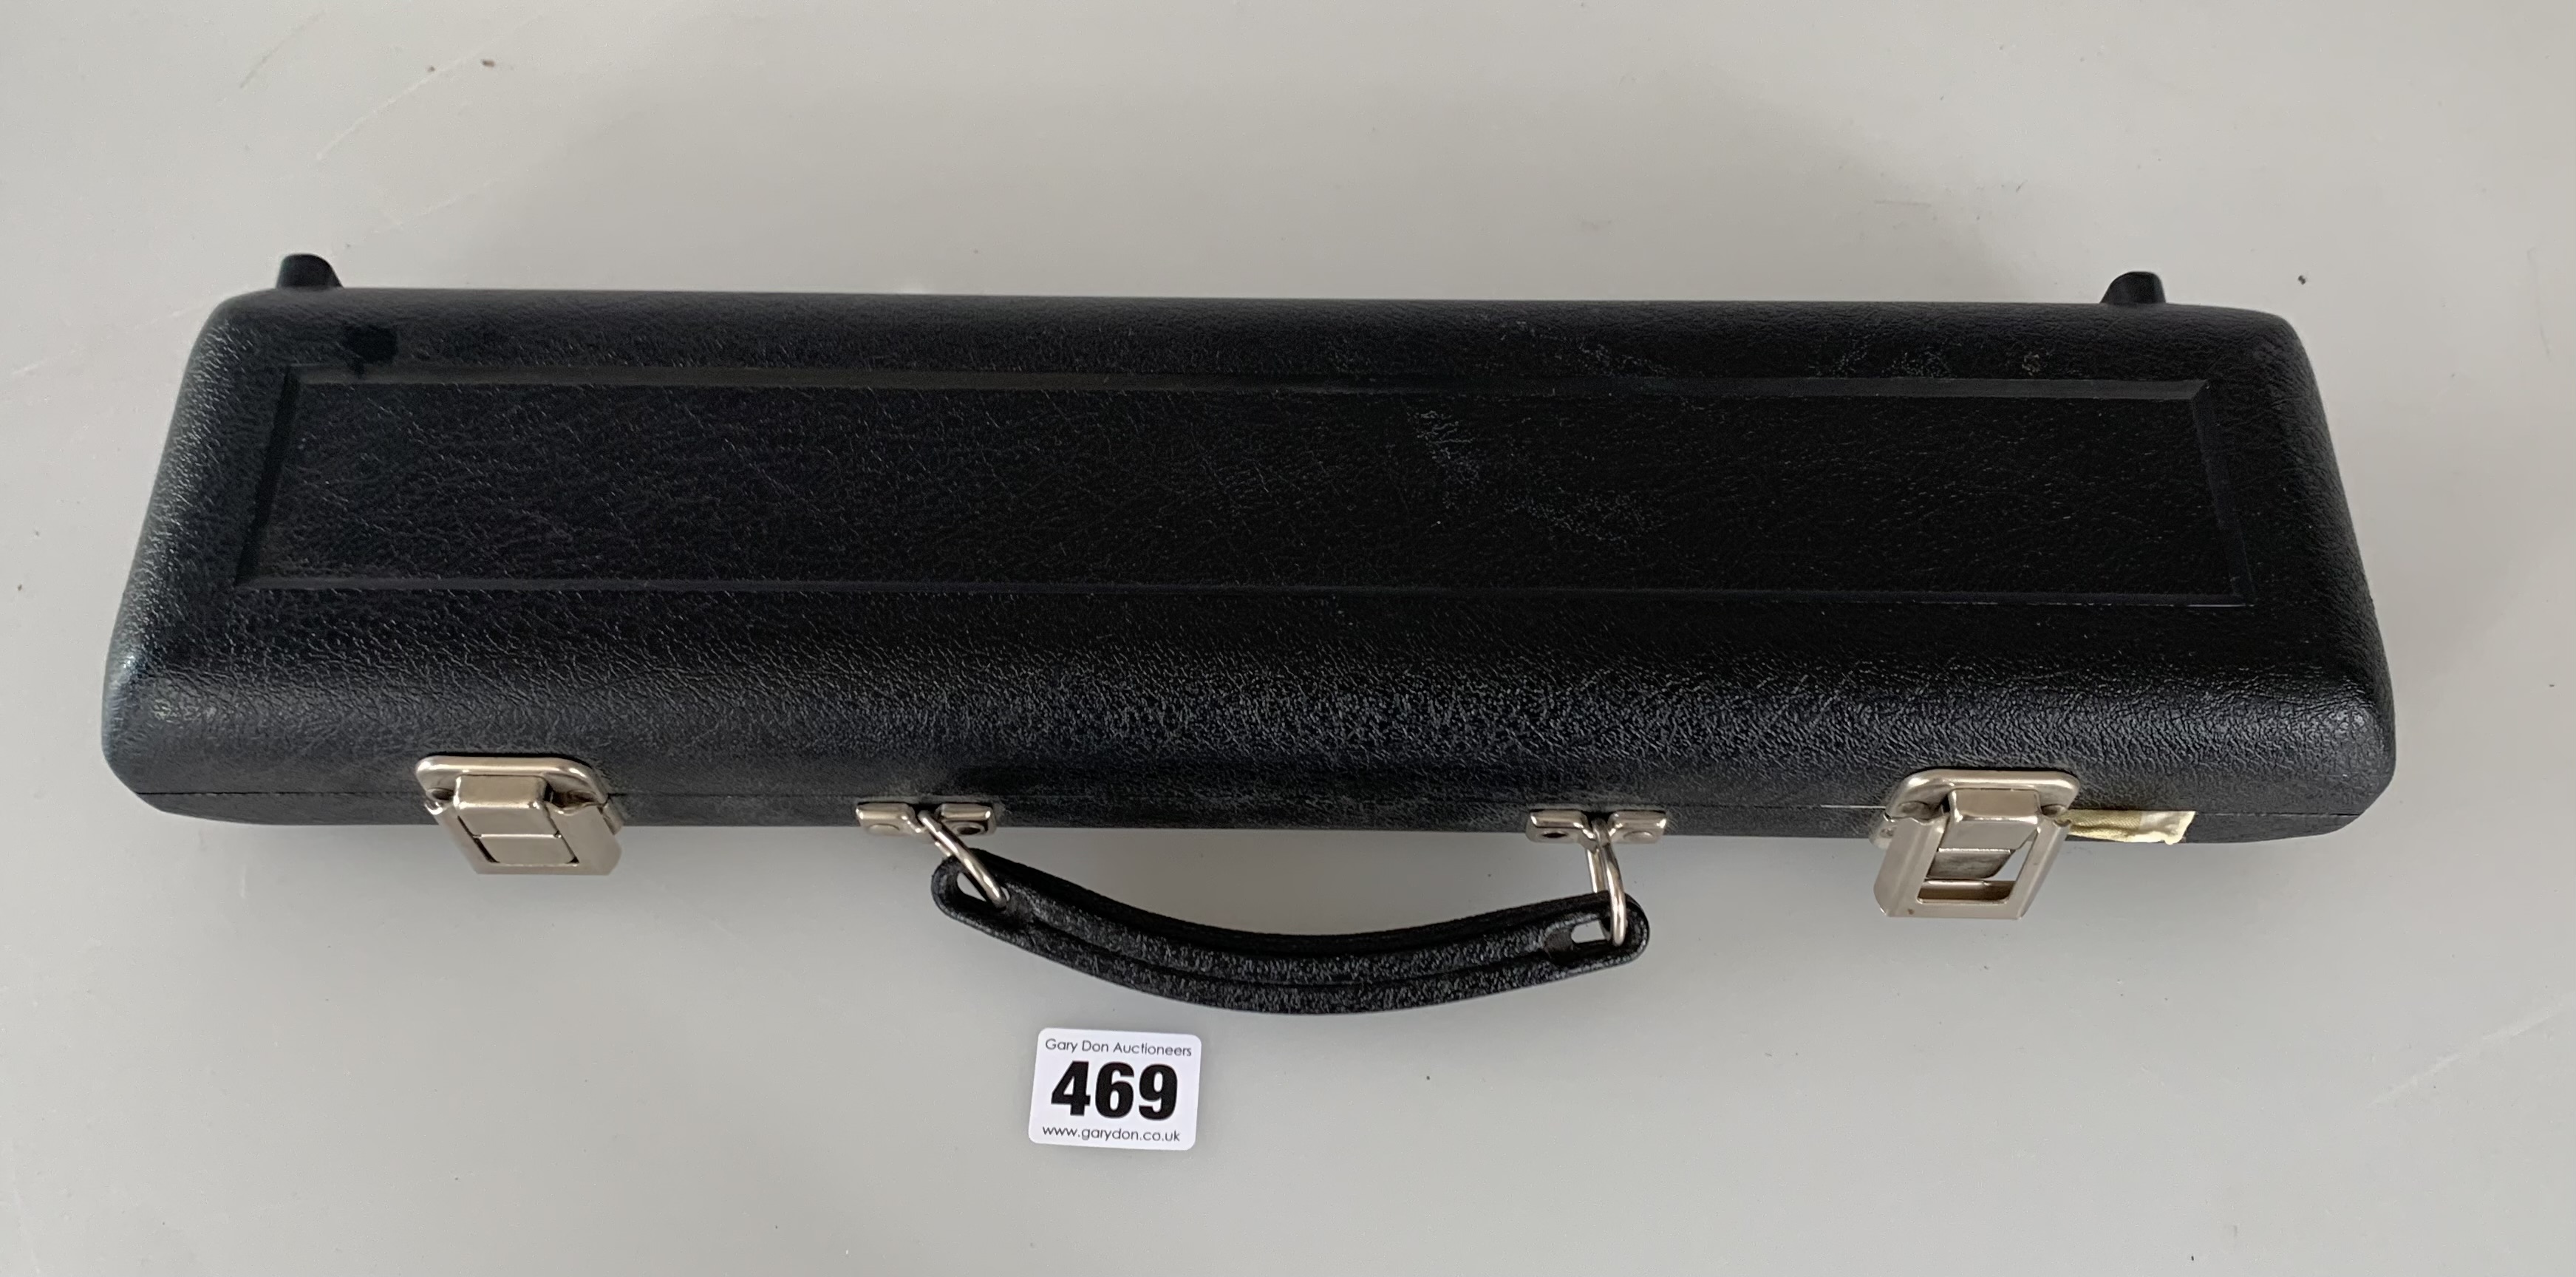 Boosey & Hawkes 400 flute in hard case - Image 4 of 4